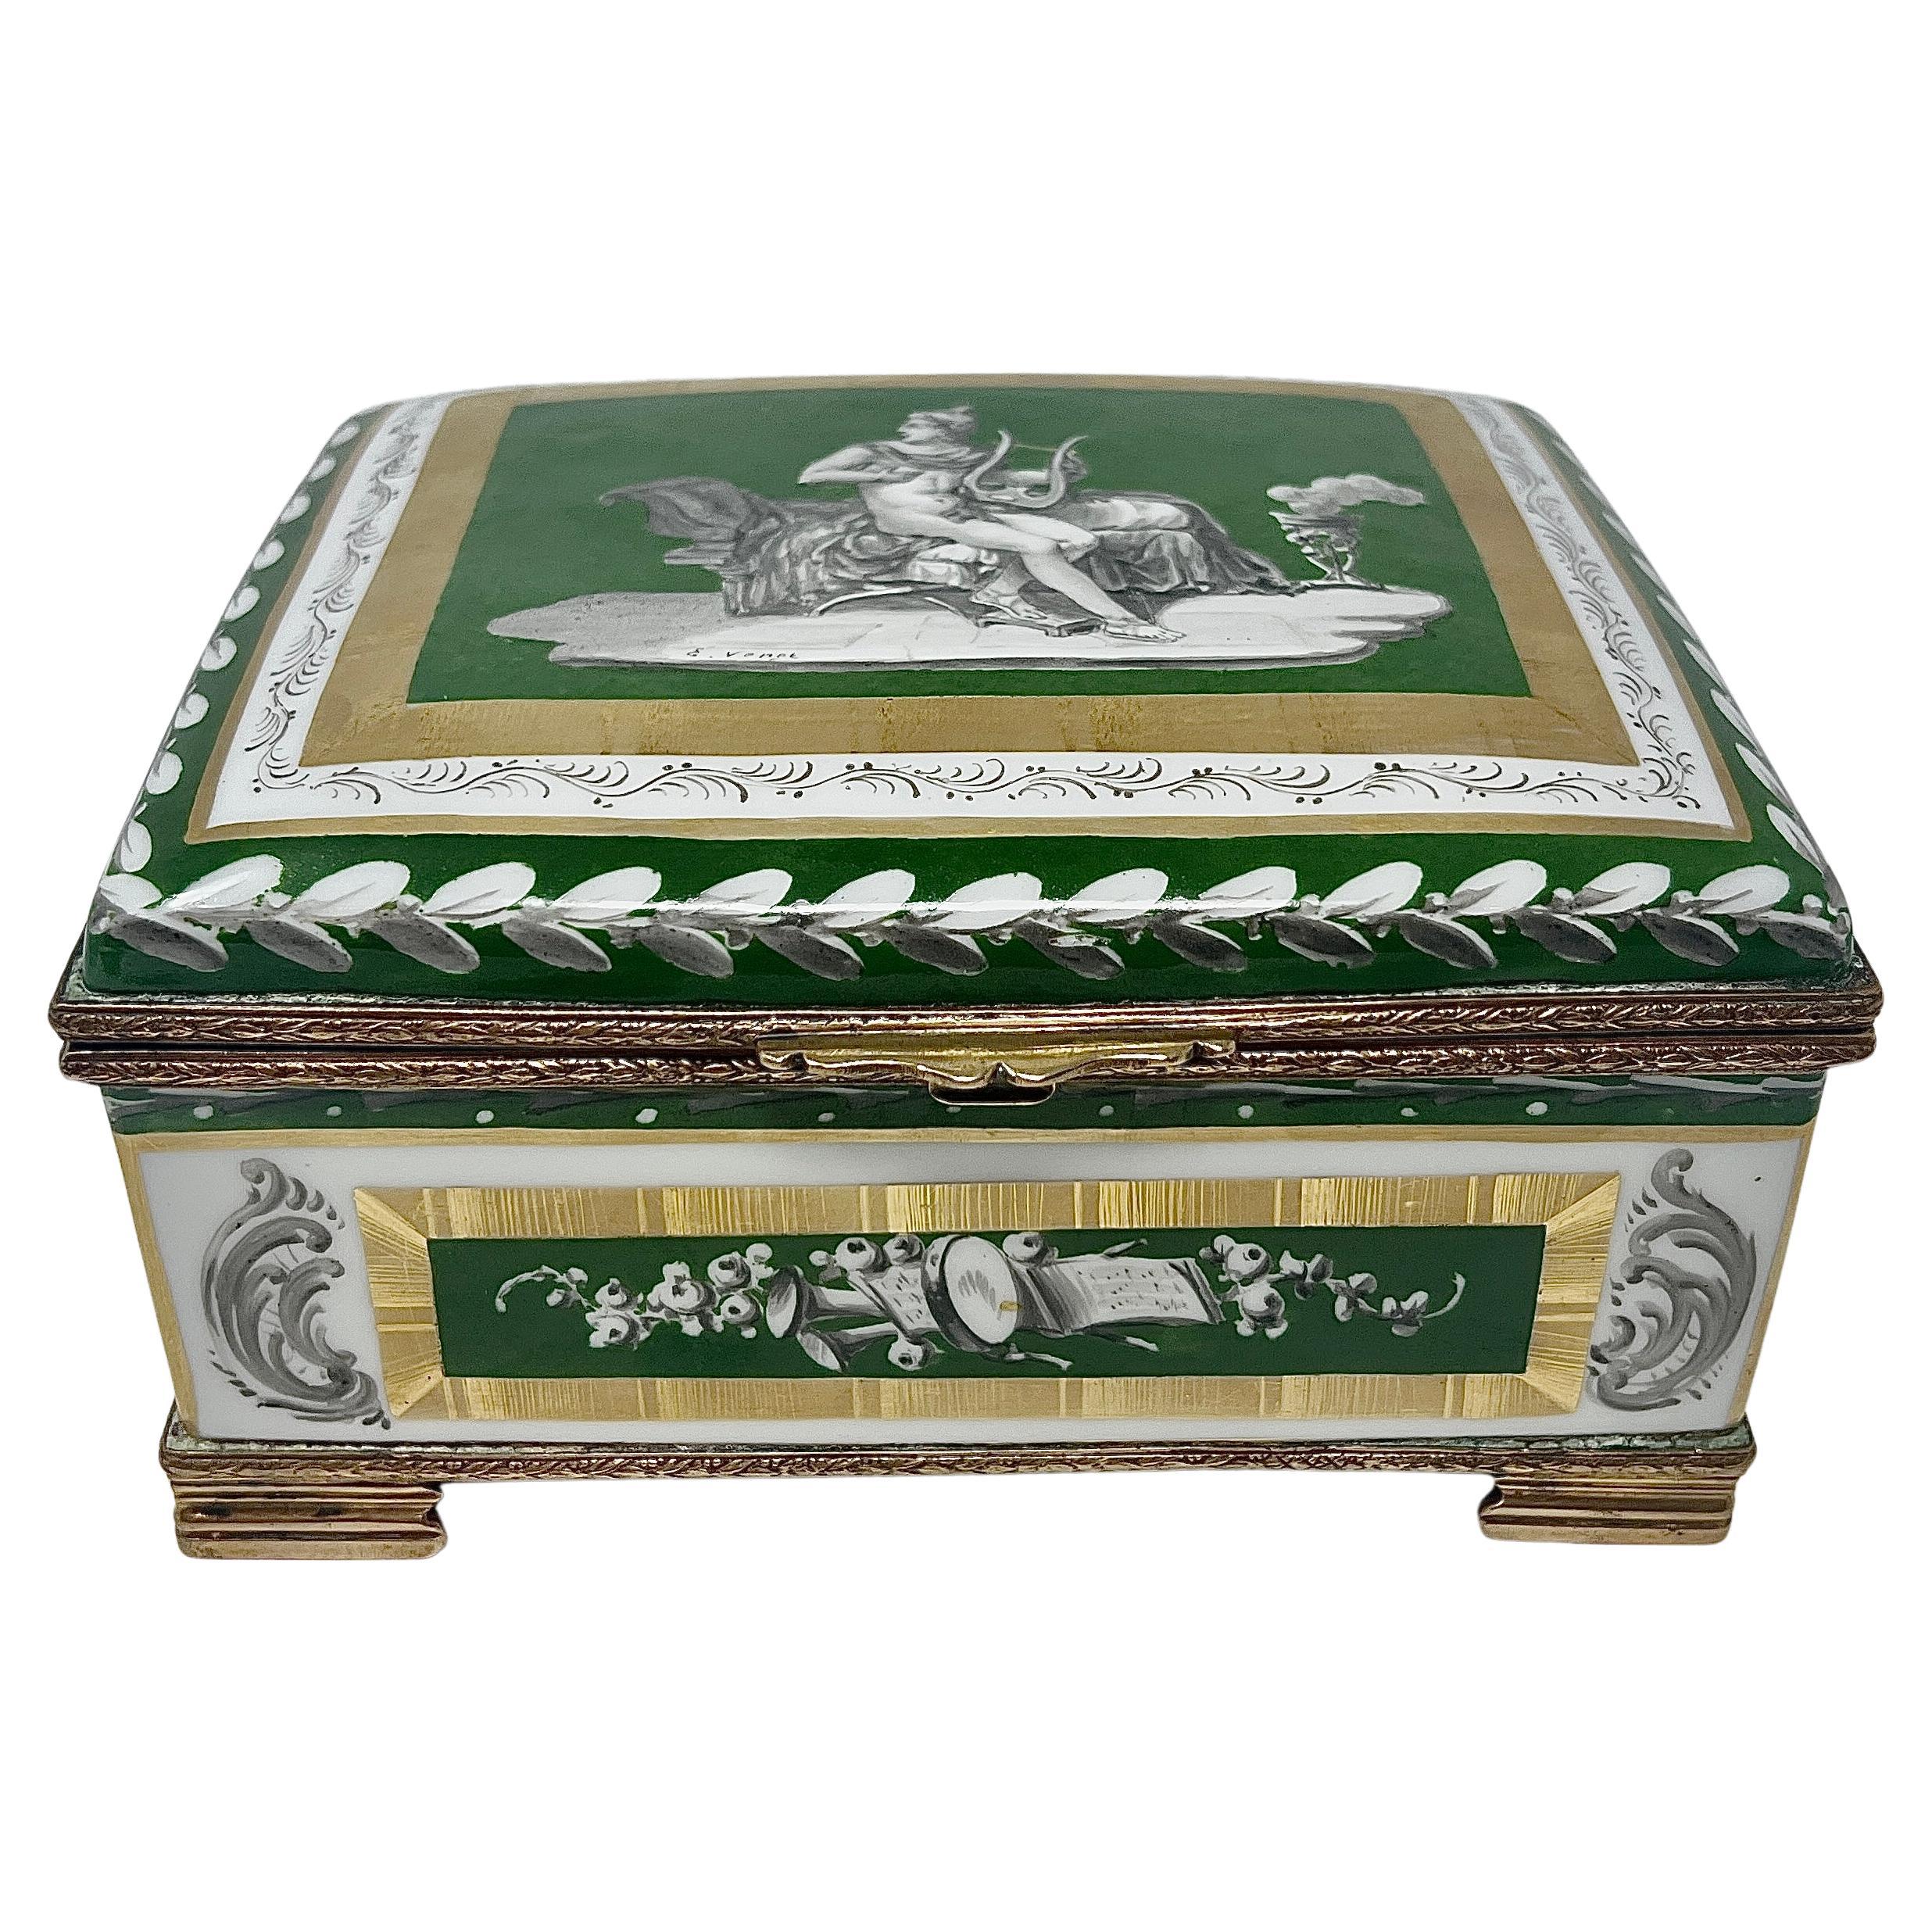 Antique French Gold Bronze Mounted Green & White Porcelain Jewel Box, Circa 1900 For Sale